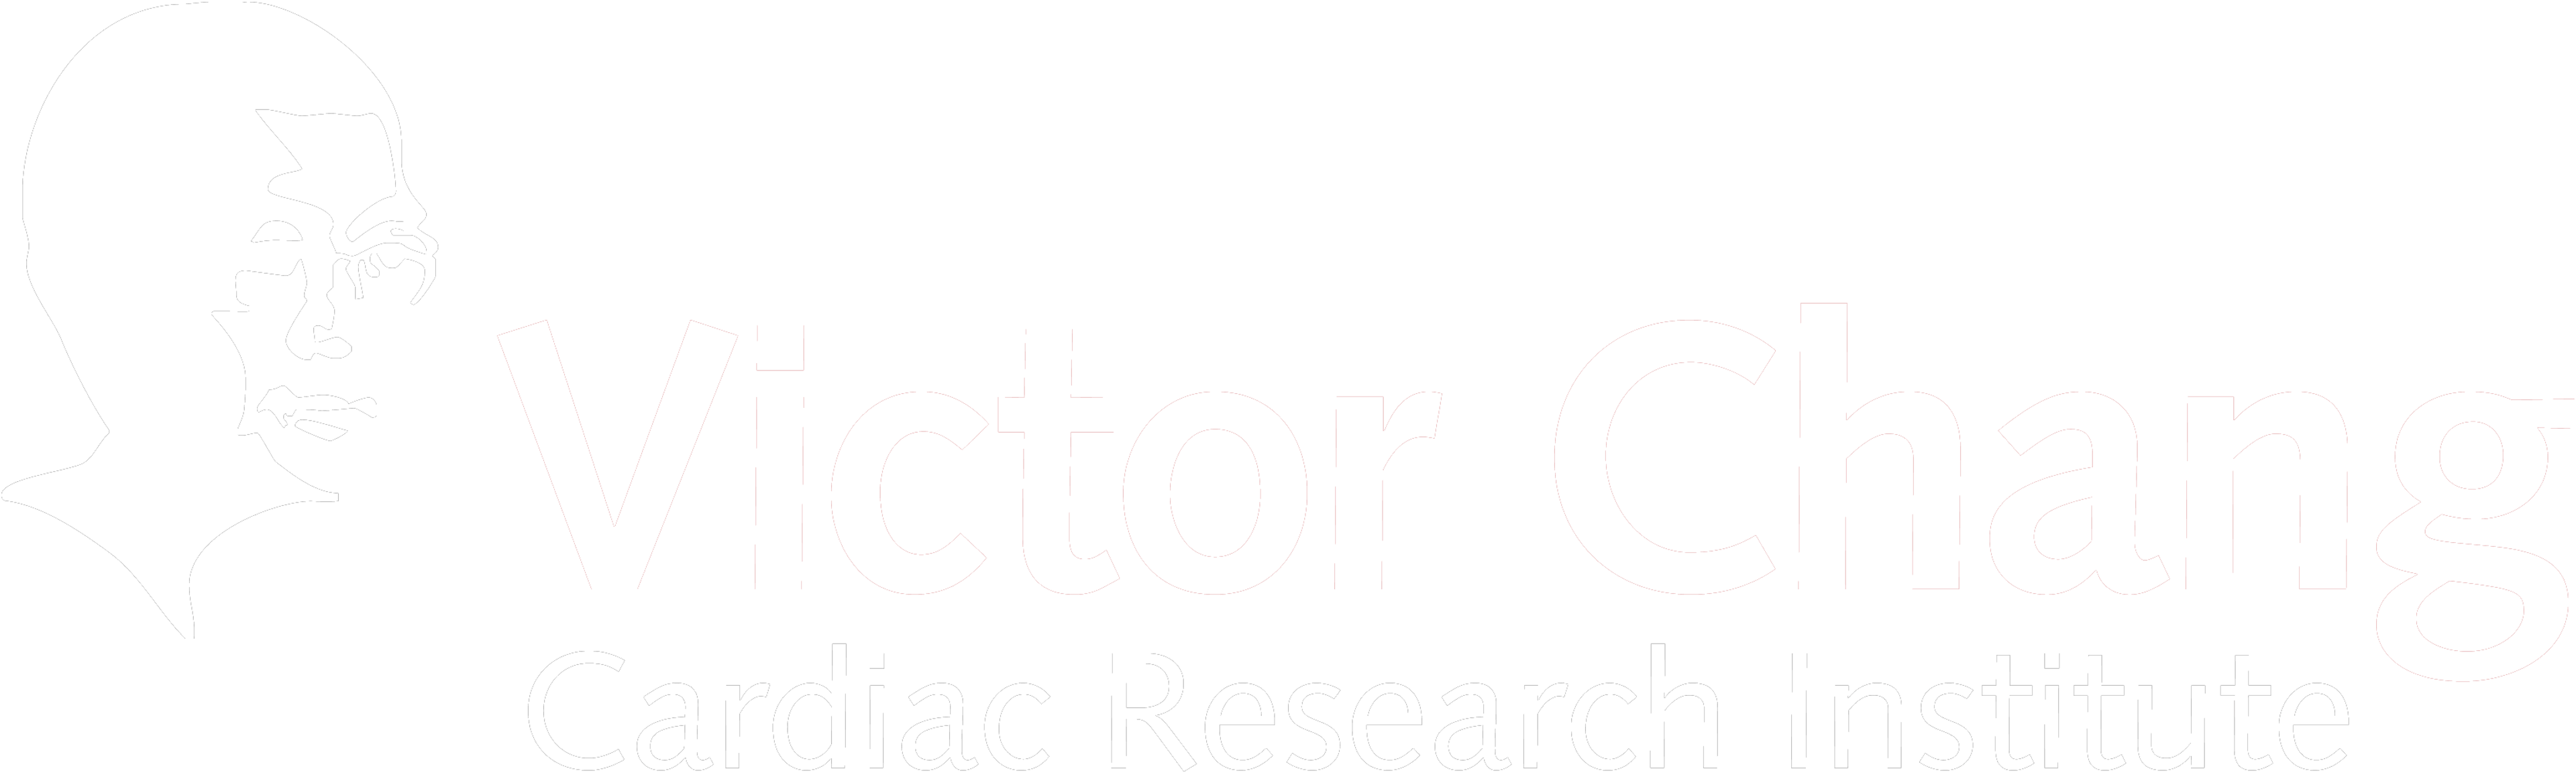 Victor Chang Research Institute Logo